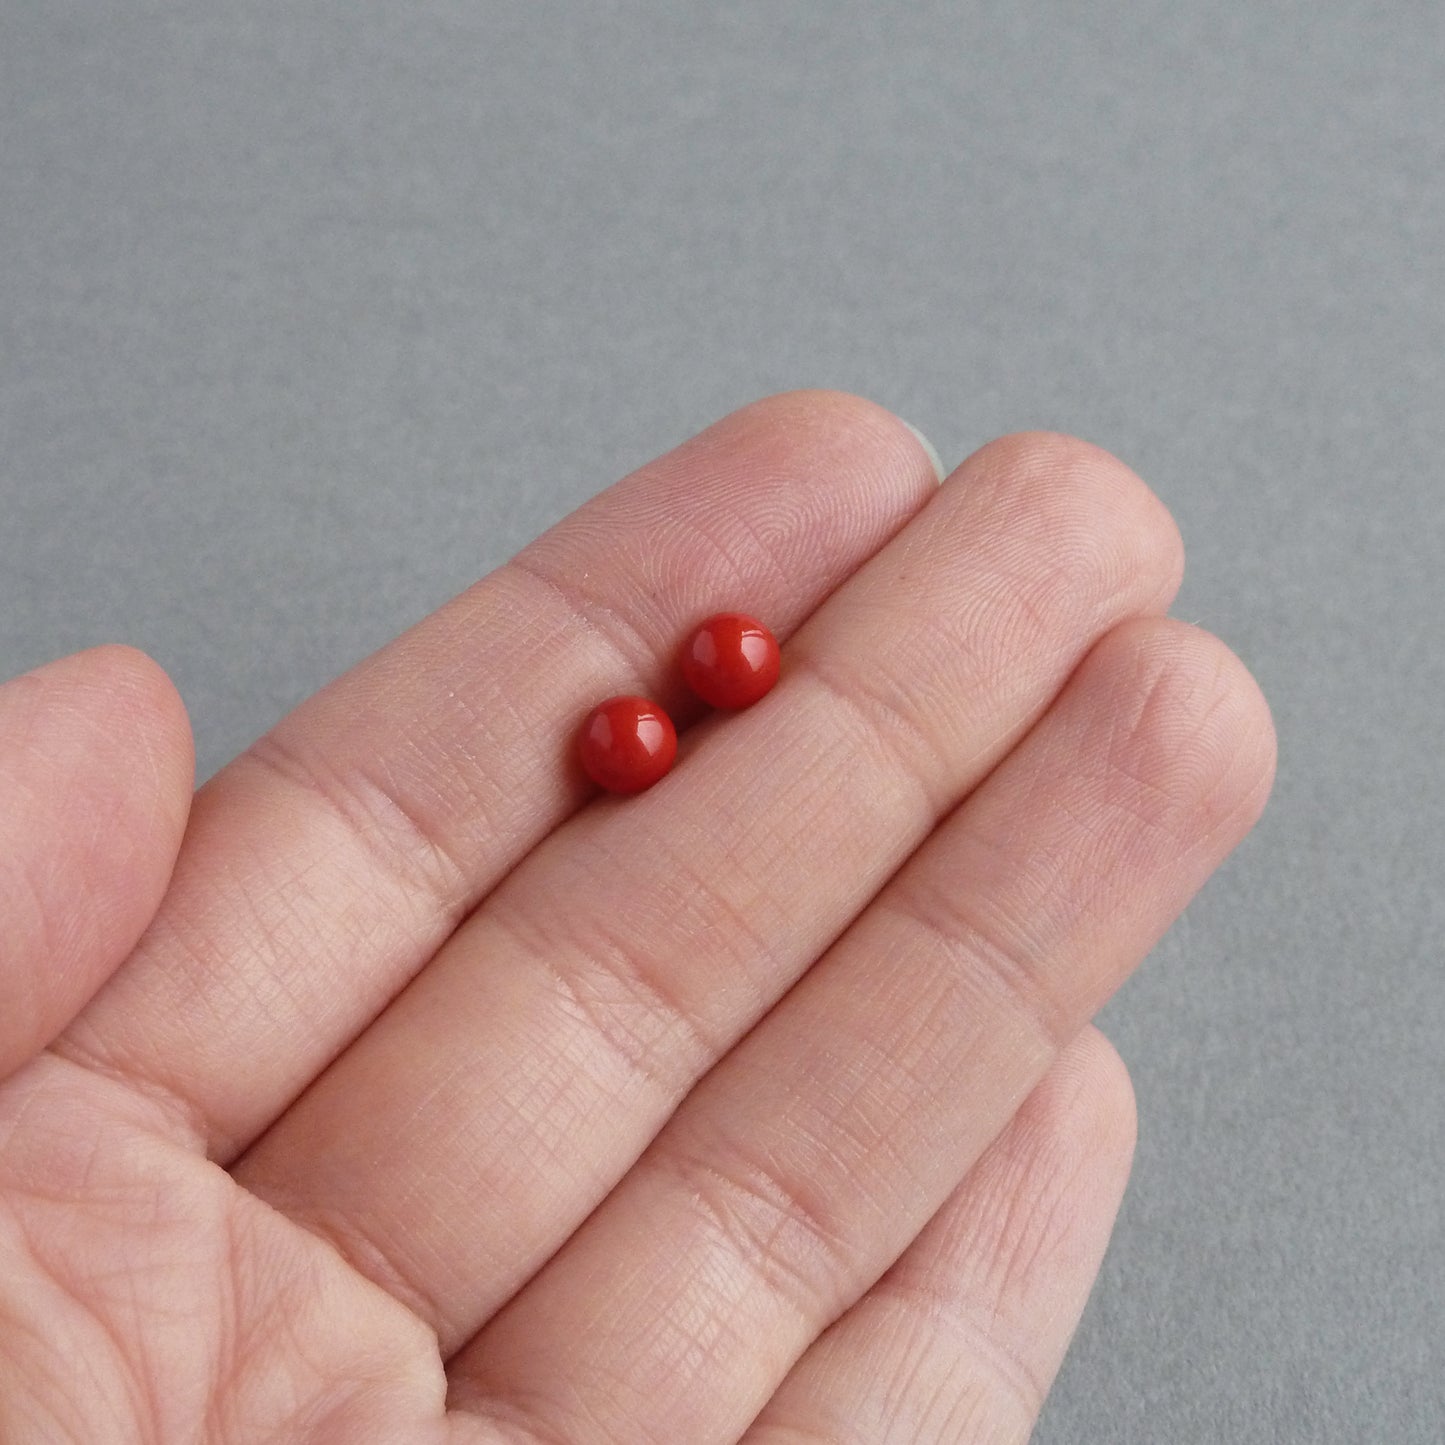 Small coral red stud earrings